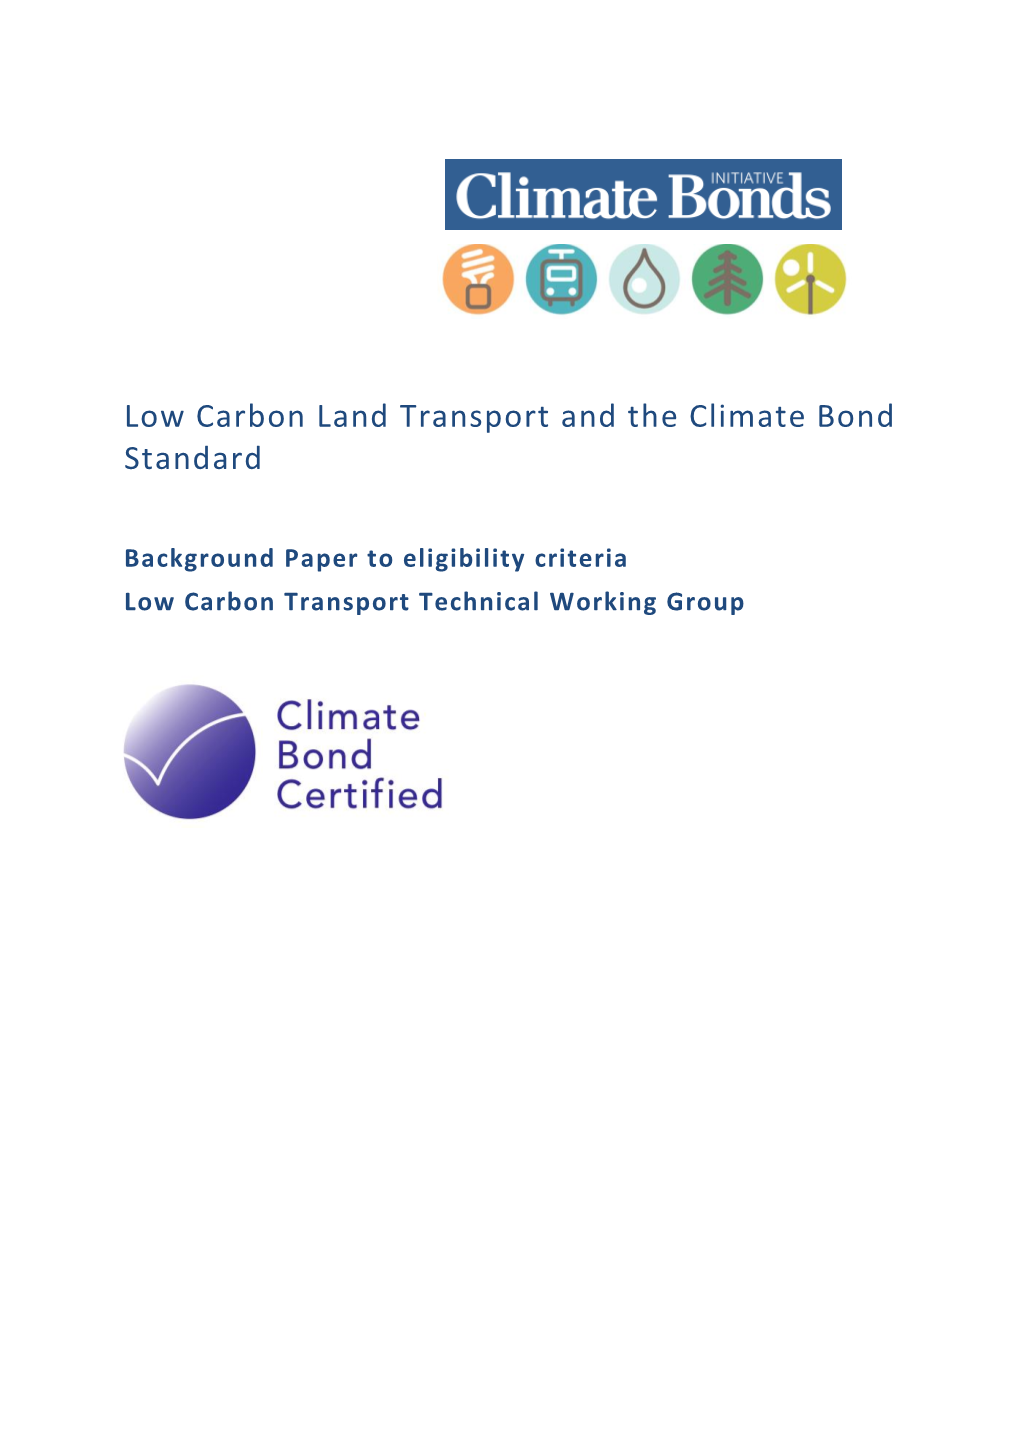 Low Carbon Land Transport and the Climate Bond Standard